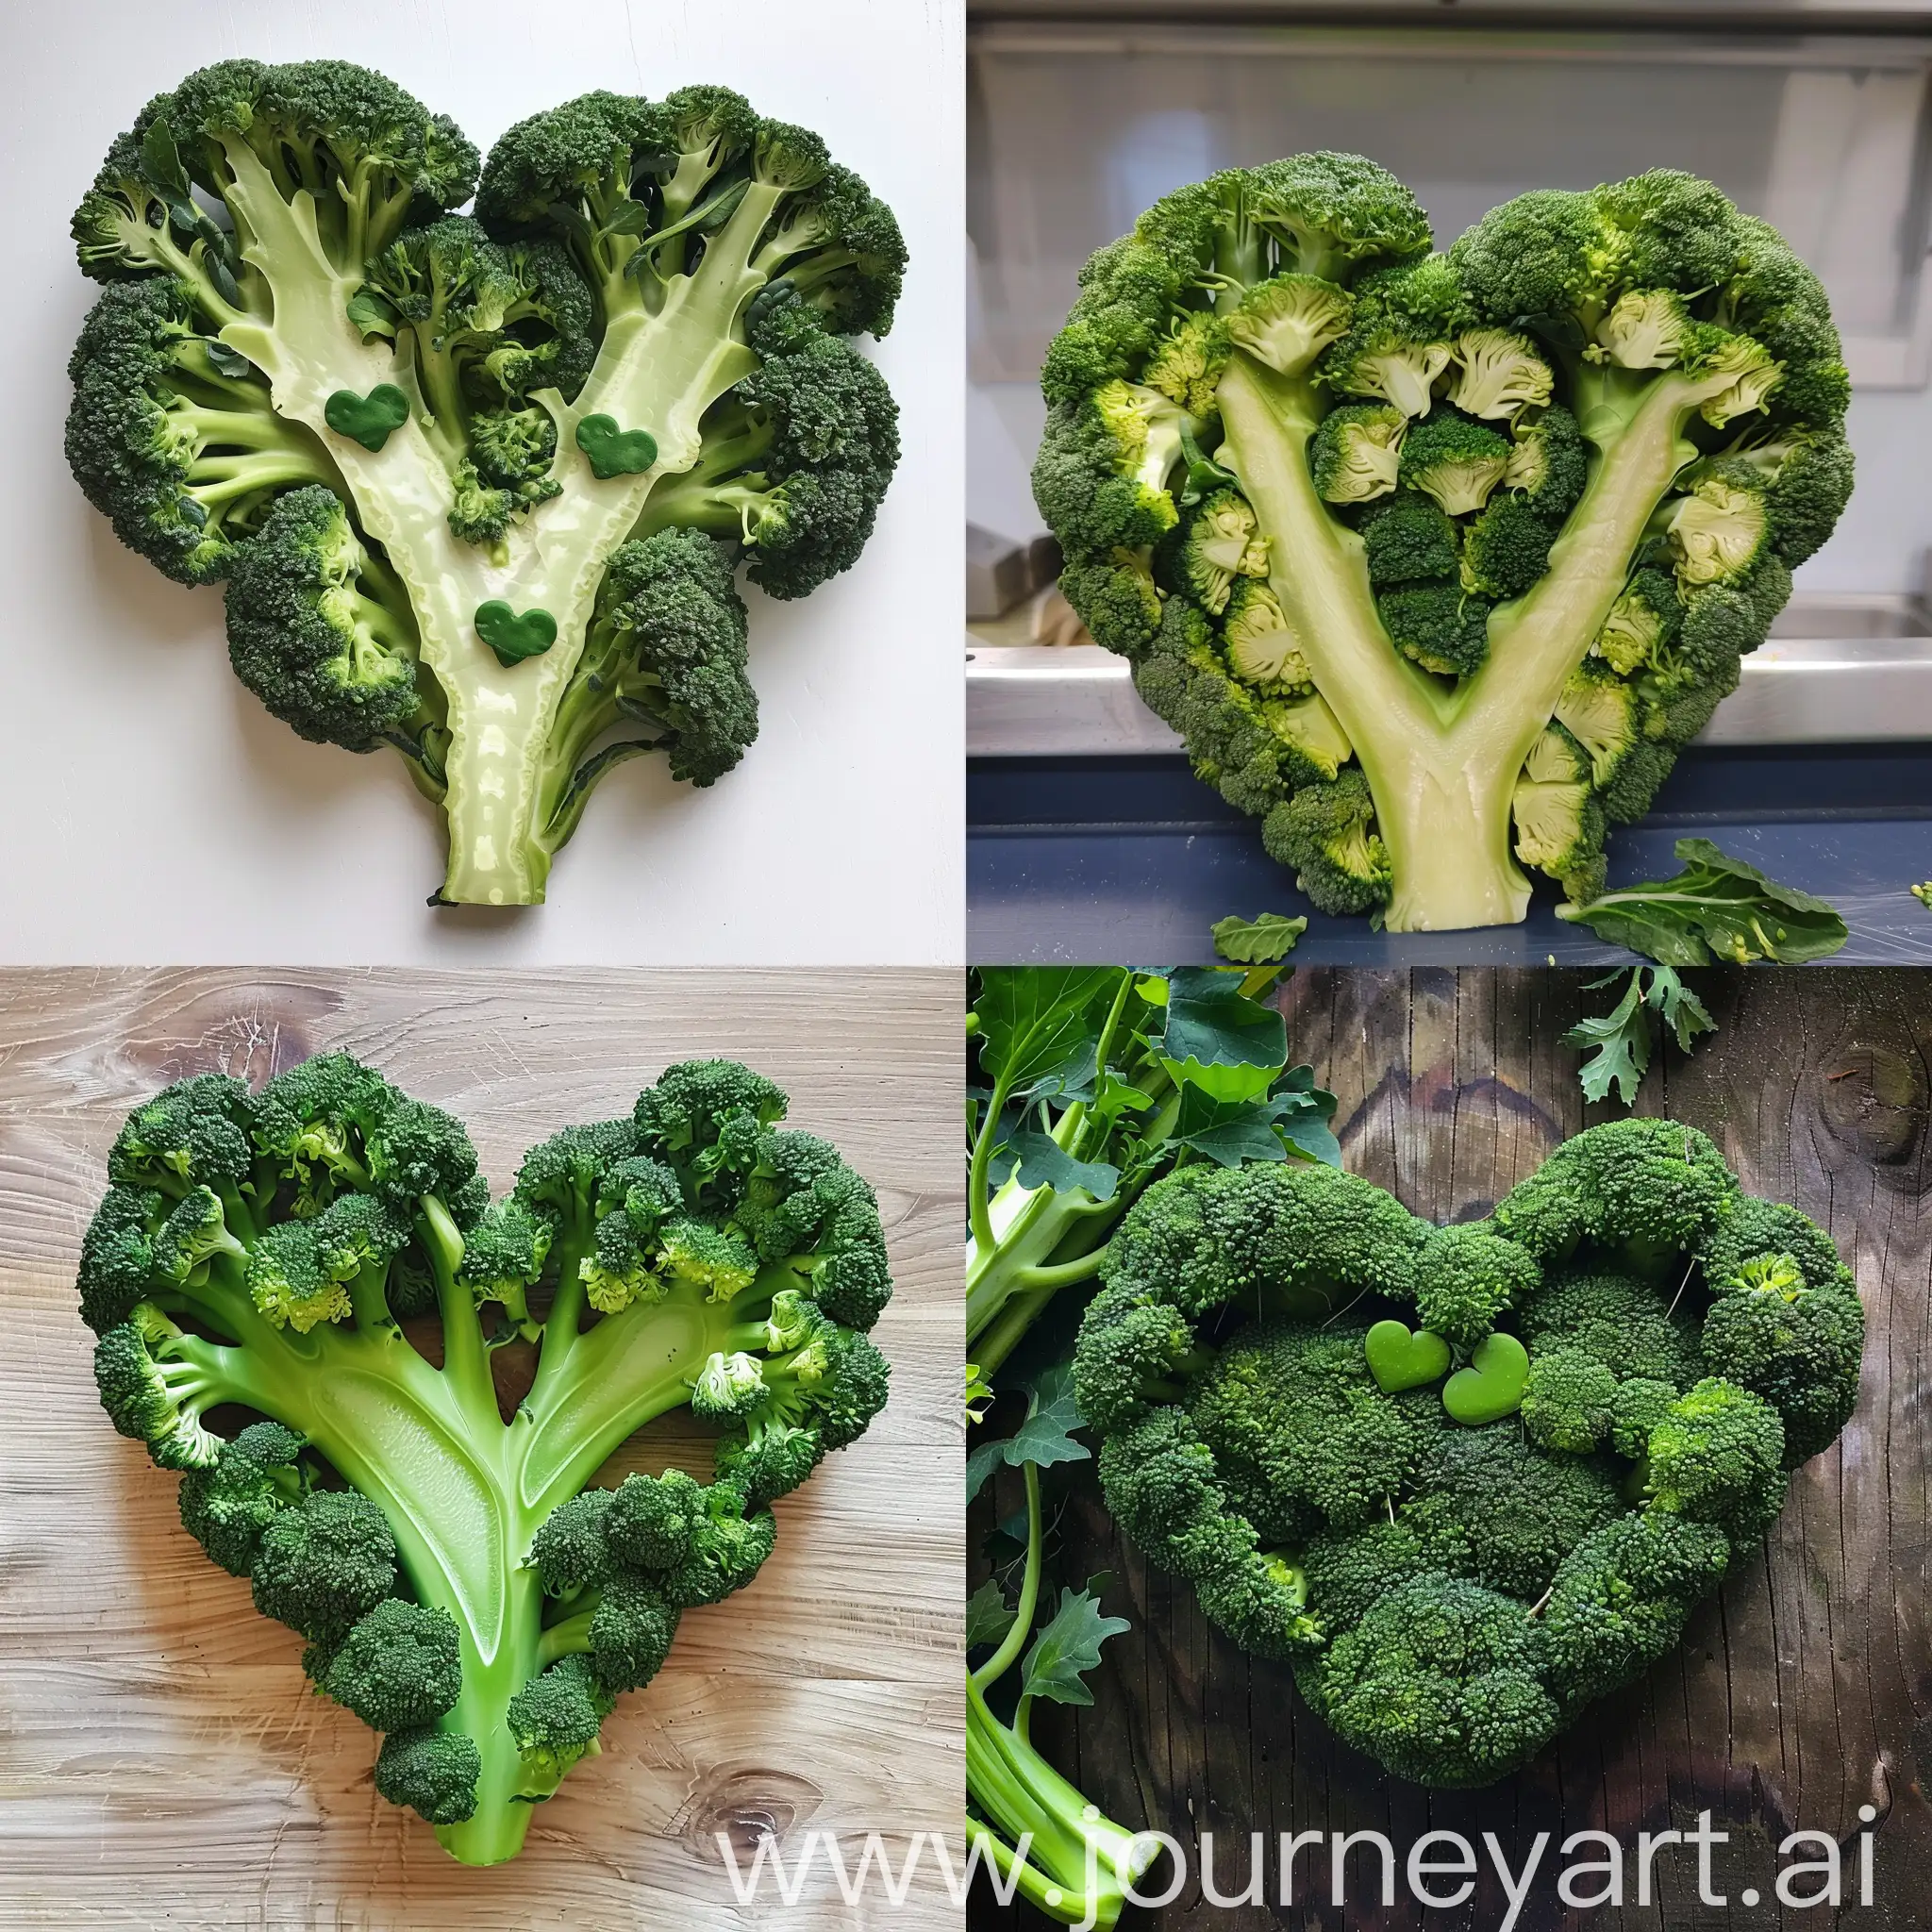 HeartShaped-Broccoli-Arrangement-Vibrant-and-Wholesome-Display-of-Fresh-Produce